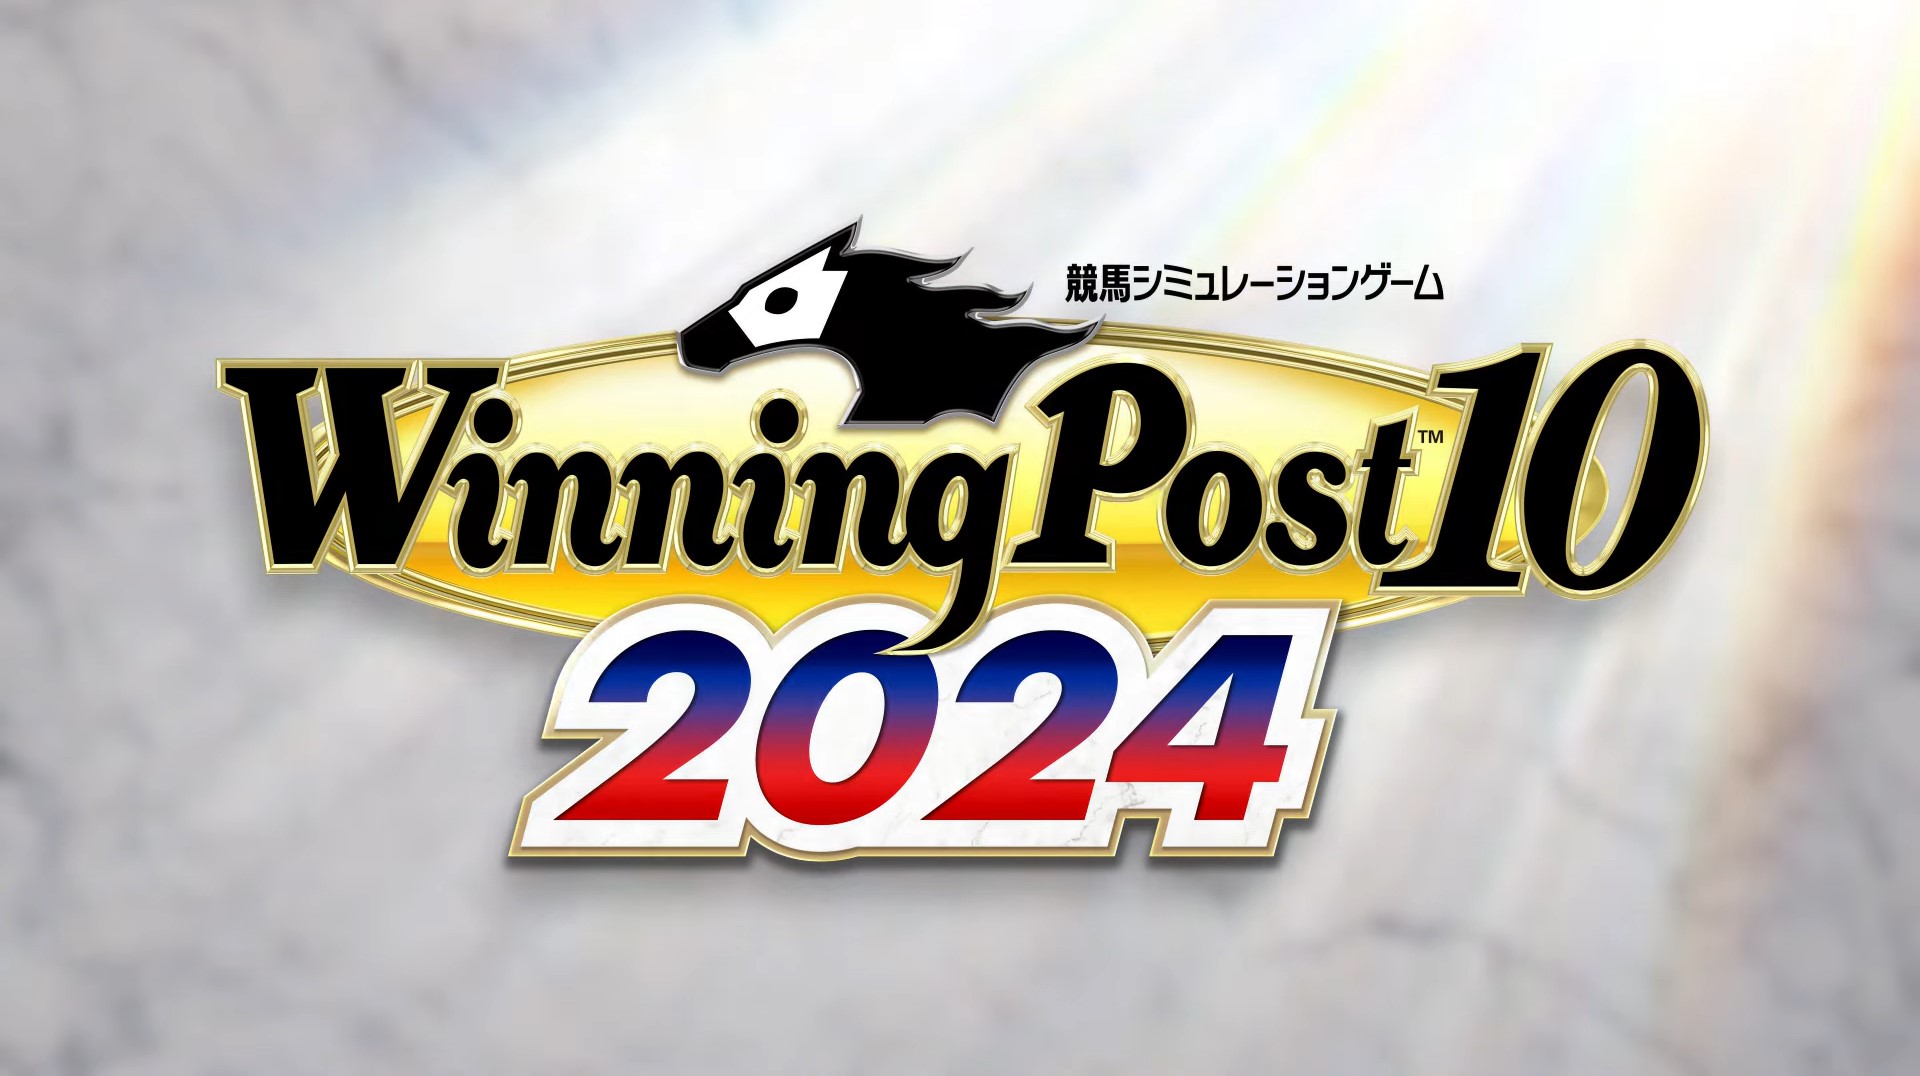 Winning Post 10 2024 revealed for Switch